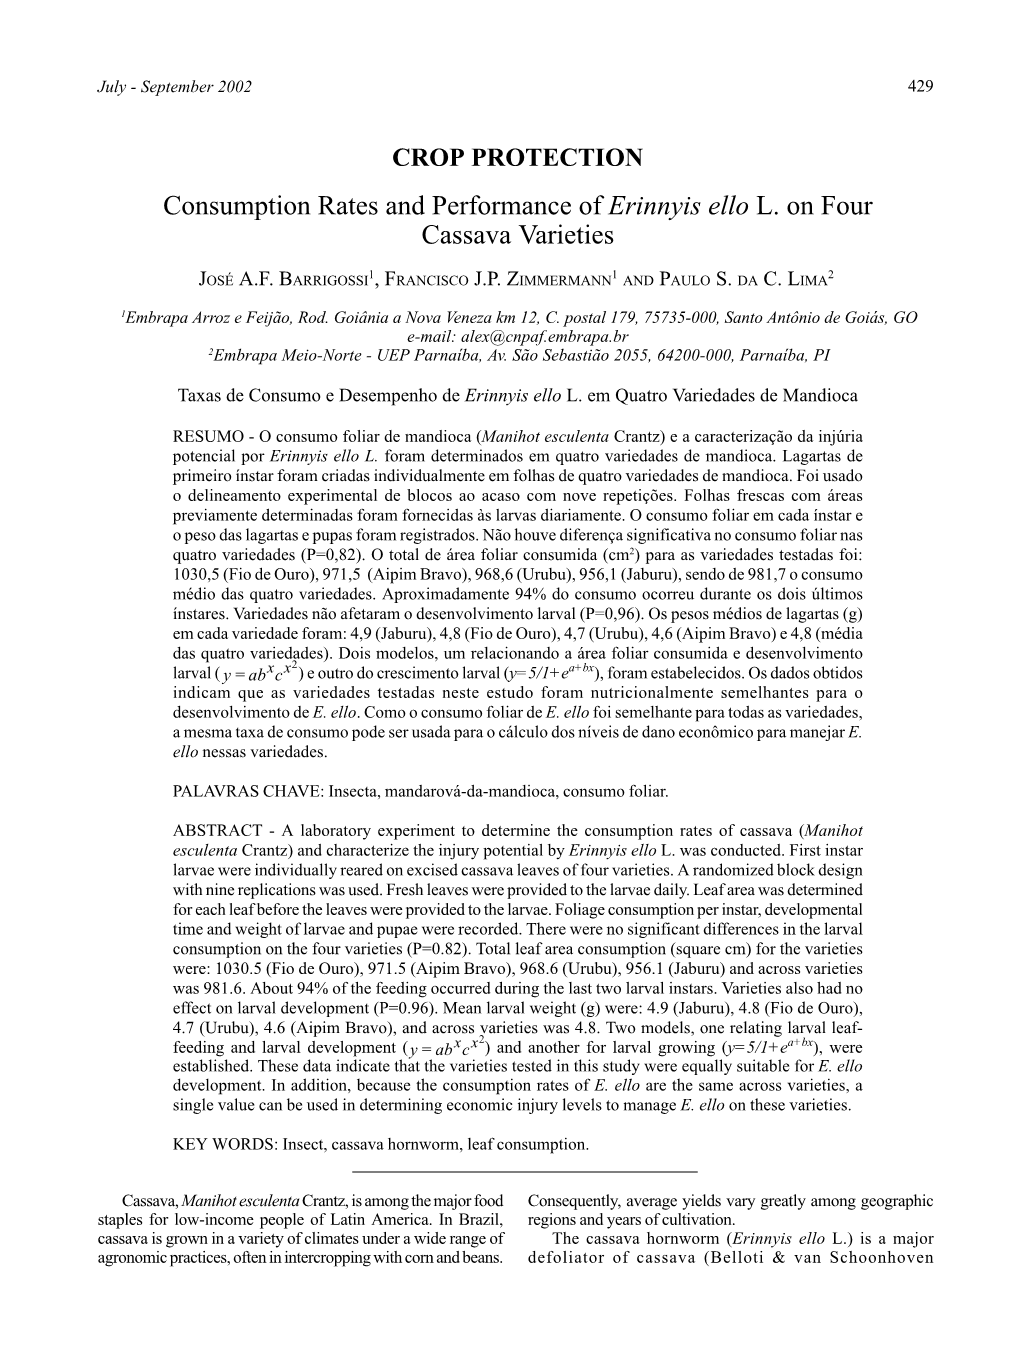 Consumption Rates and Performance of Erinnyis Ello L. on Four Cassava Varieties